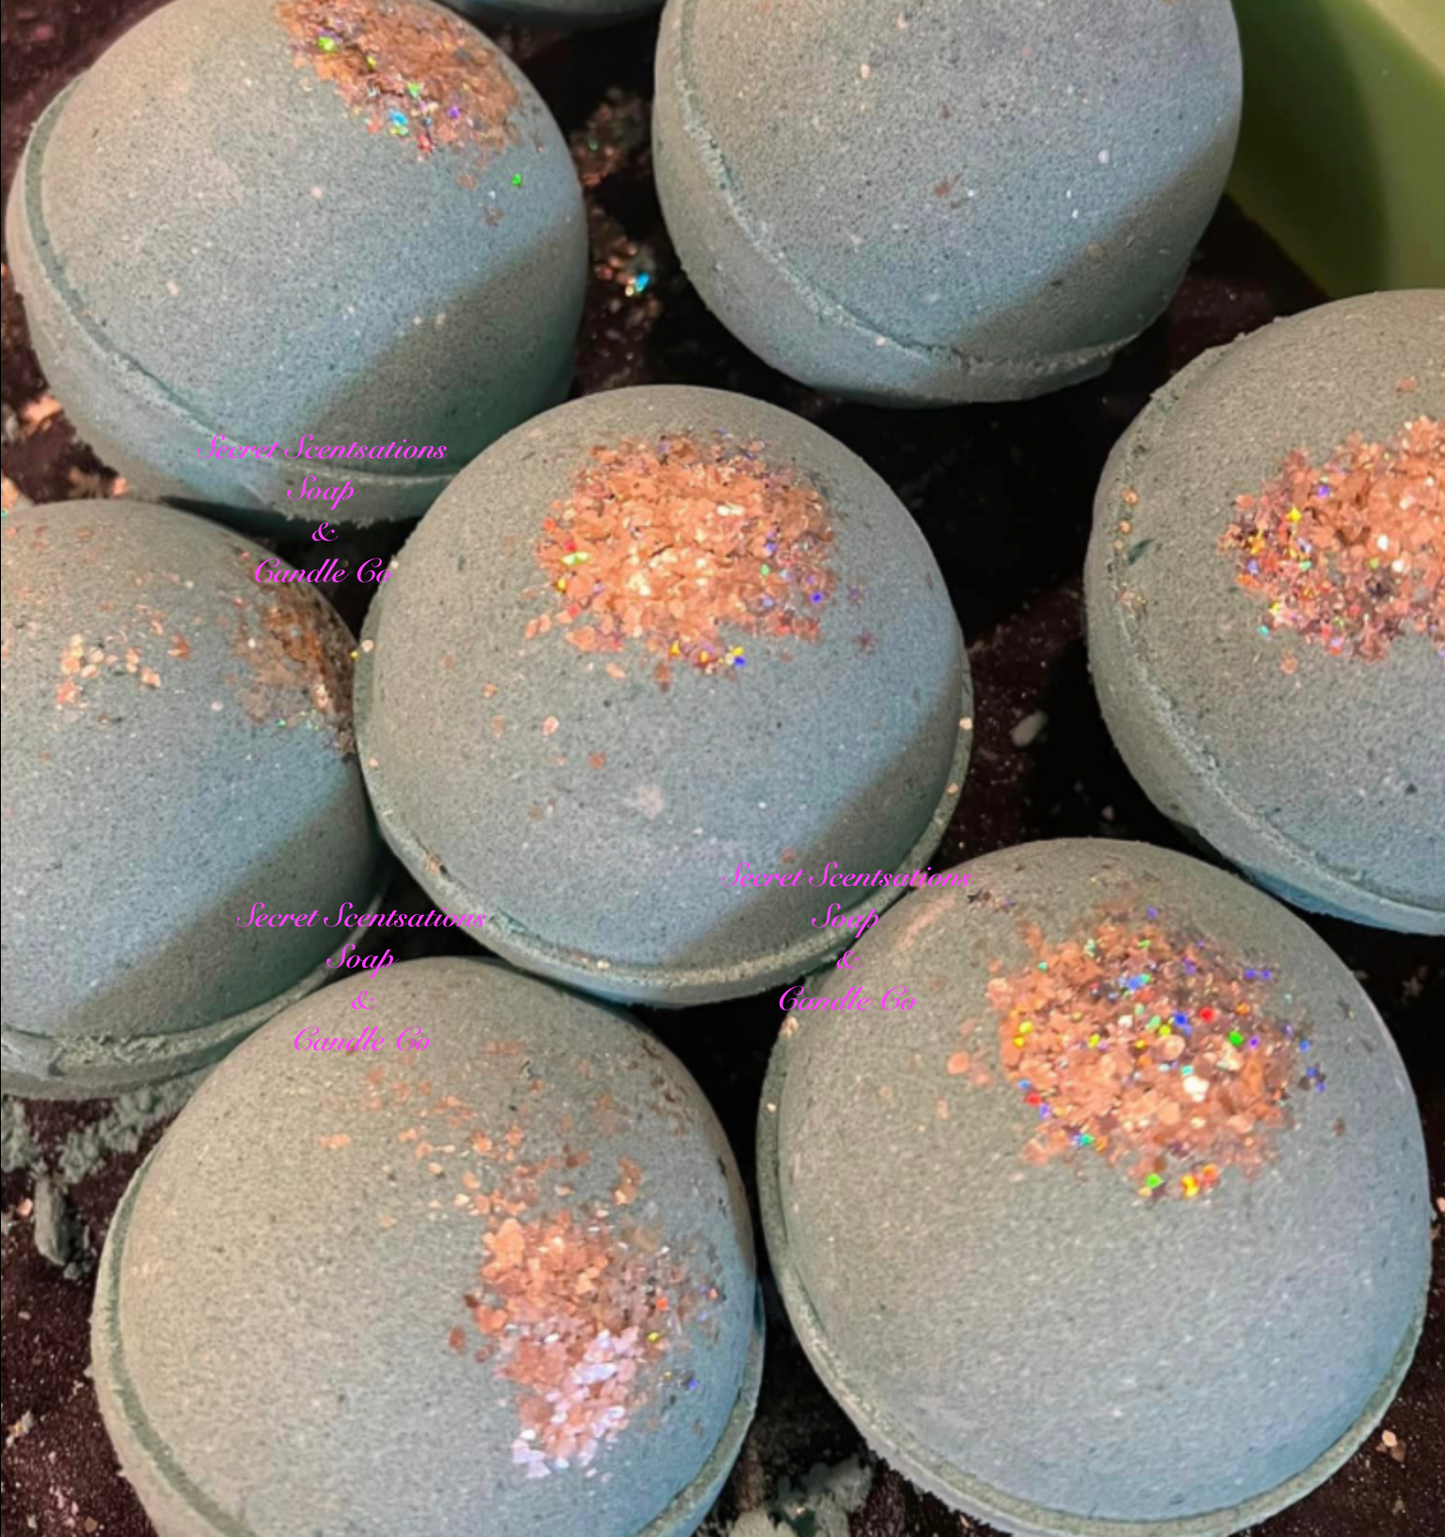 Lavender Scented with Caribbean Escape. Mica natural color. Essential Castor Oil. Vitamin E Essential Oil and Shorea Butter. Essential Avocado Oil. Eatible star glitter on top. Large ball shape 7 inches round.. Bath Bombs